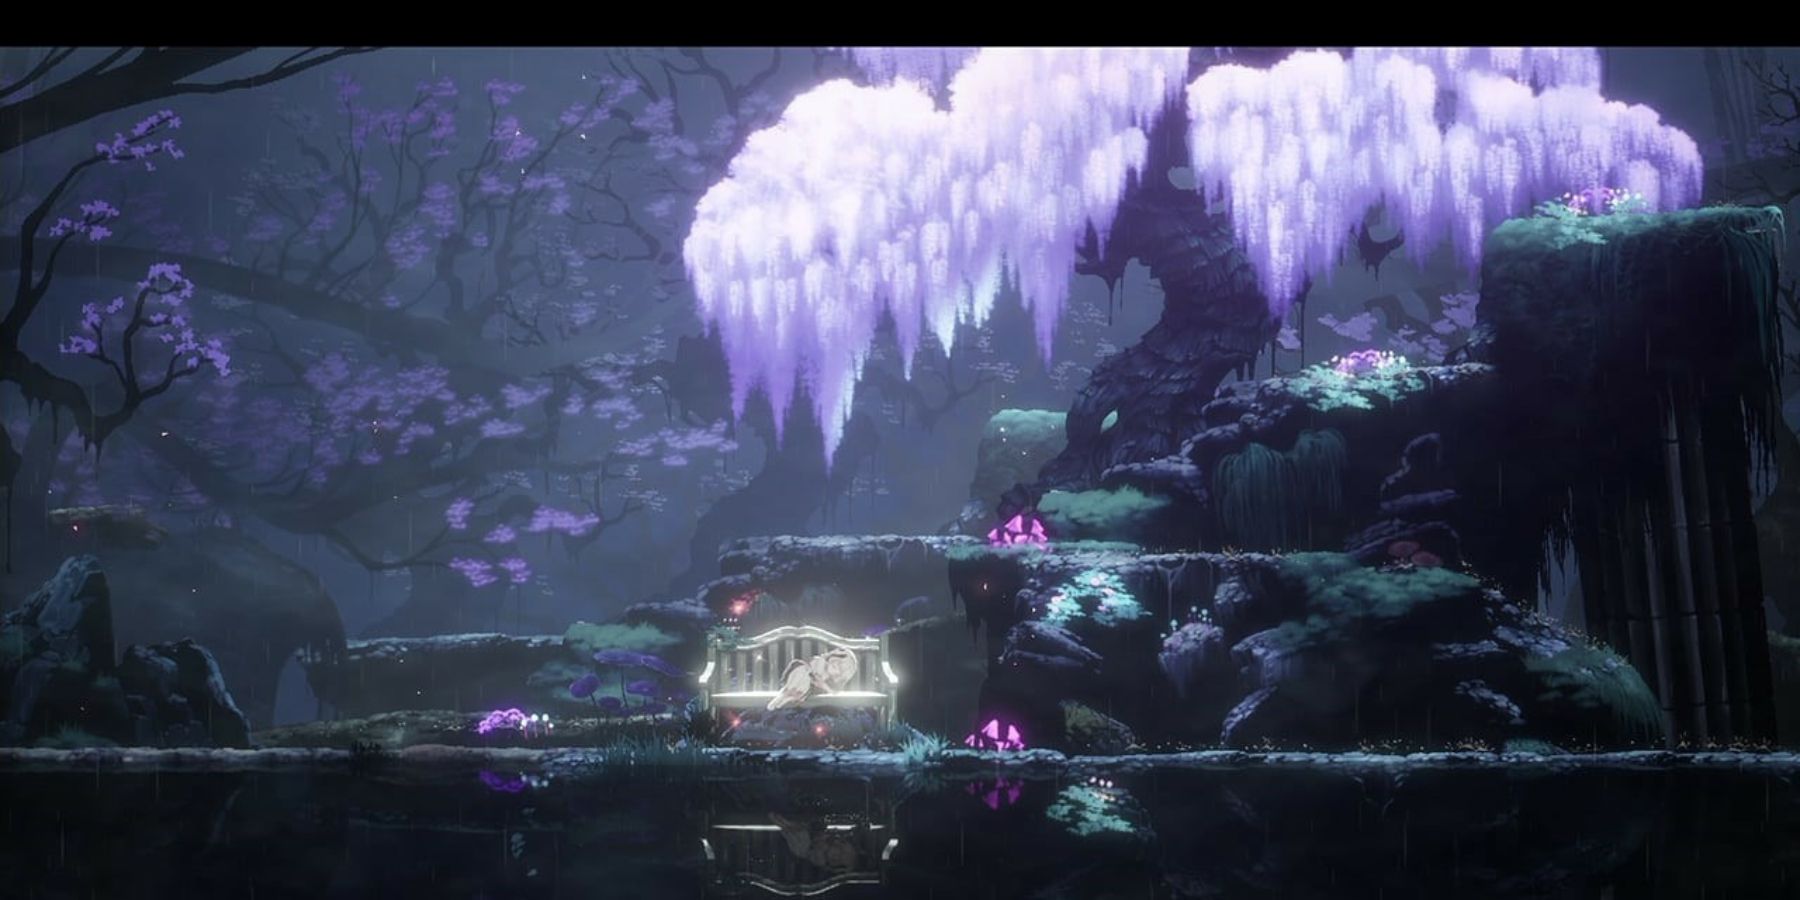 The main character is sleeping on a bench with a dark fantasy background in Ender Lilies.